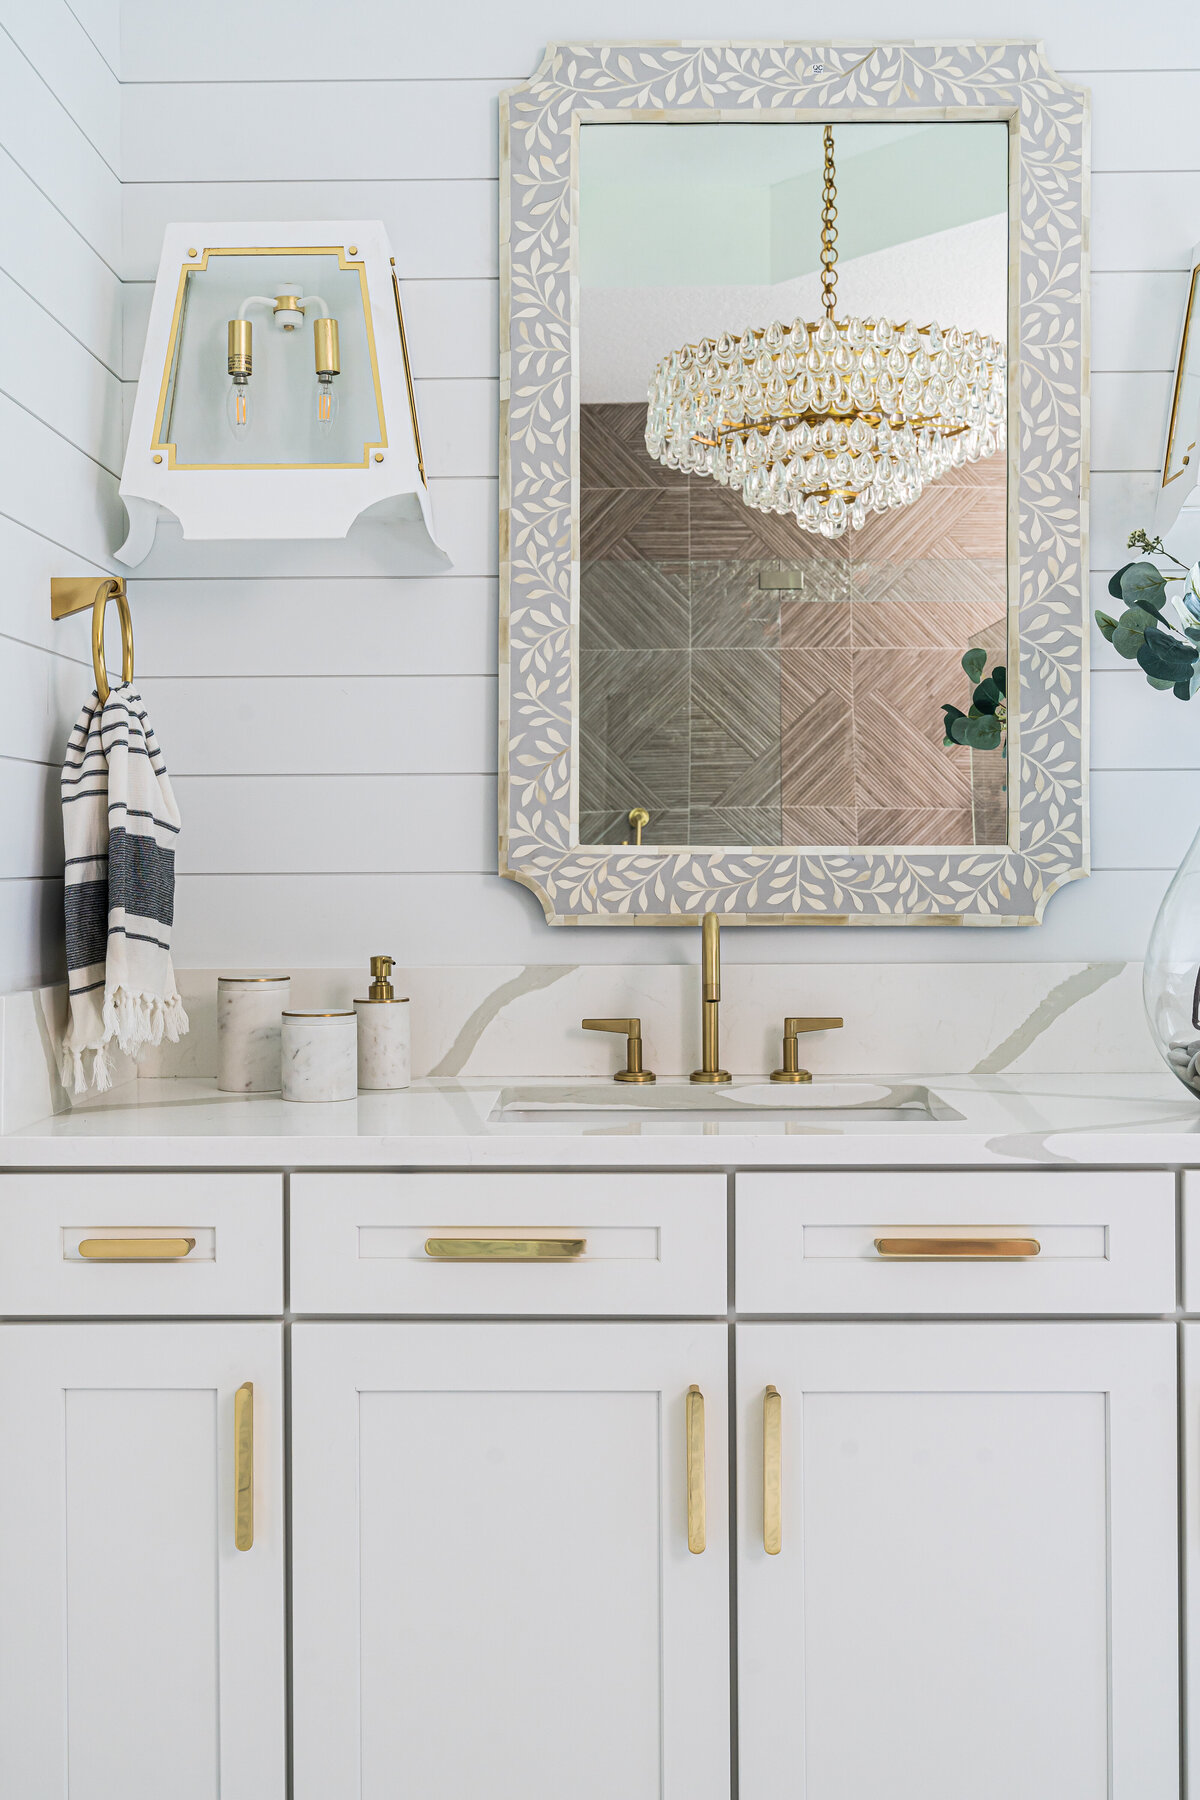 coastal home Master Bathroom Full Service Interior Design Vanity and Mirror with Chandelier by Island Home Interiors Lake Nona